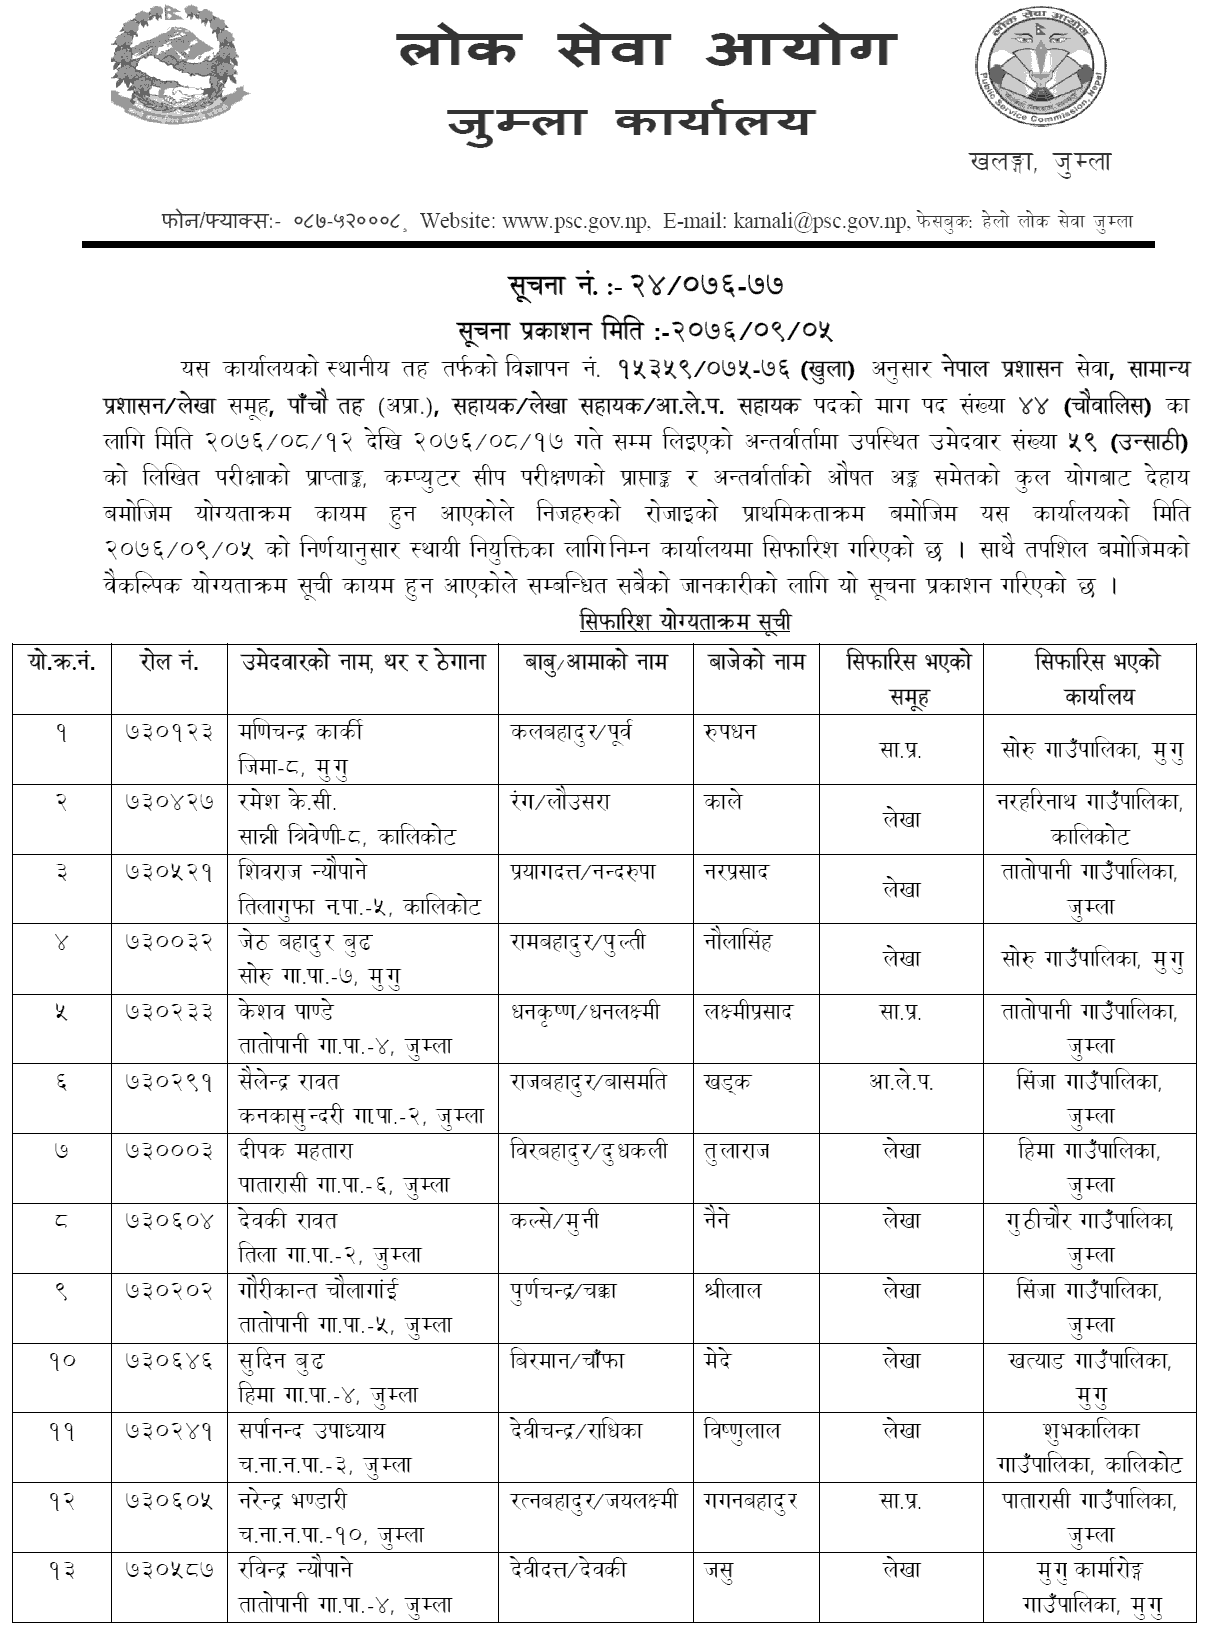 Lok Sewa Aayog Jumla Local Level Assistant 5th Final Result and Appointment